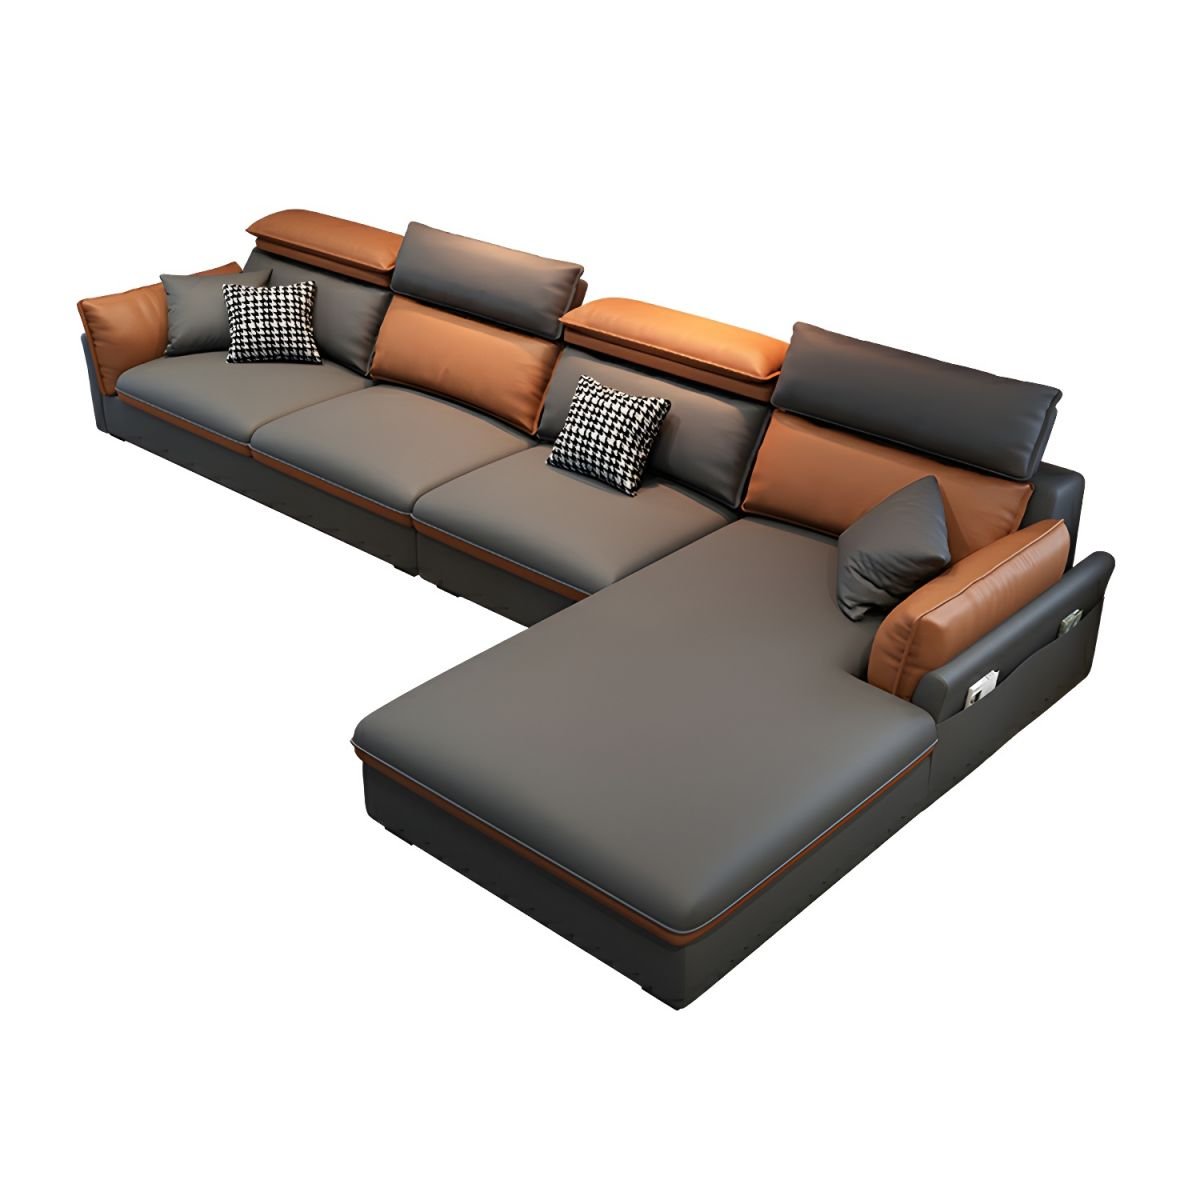 Contemporary Pillow Top Arm Sectional Sofa in Gray and Orange with Adjustable Back - 126"L x 71"W x 31"H Tech Cloth